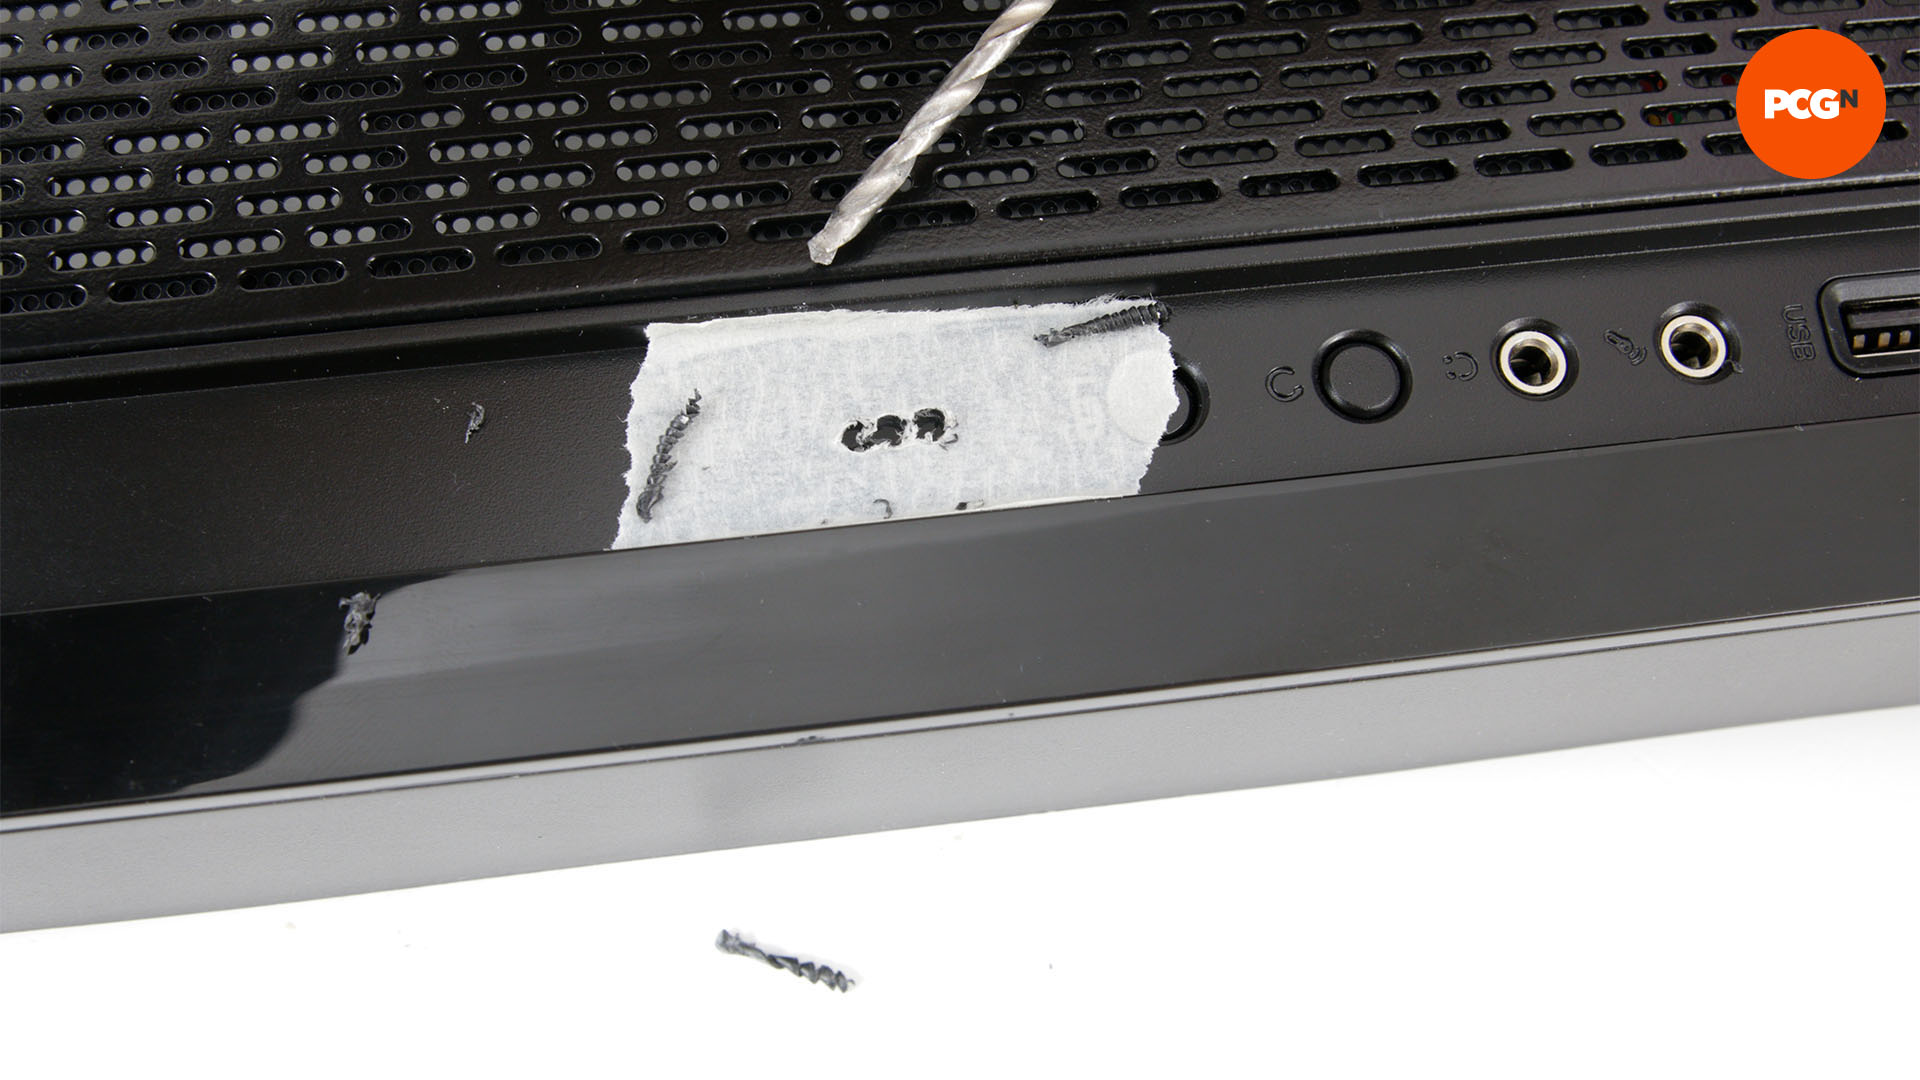 How to add USB-C to your PC case: Drill pilot holes